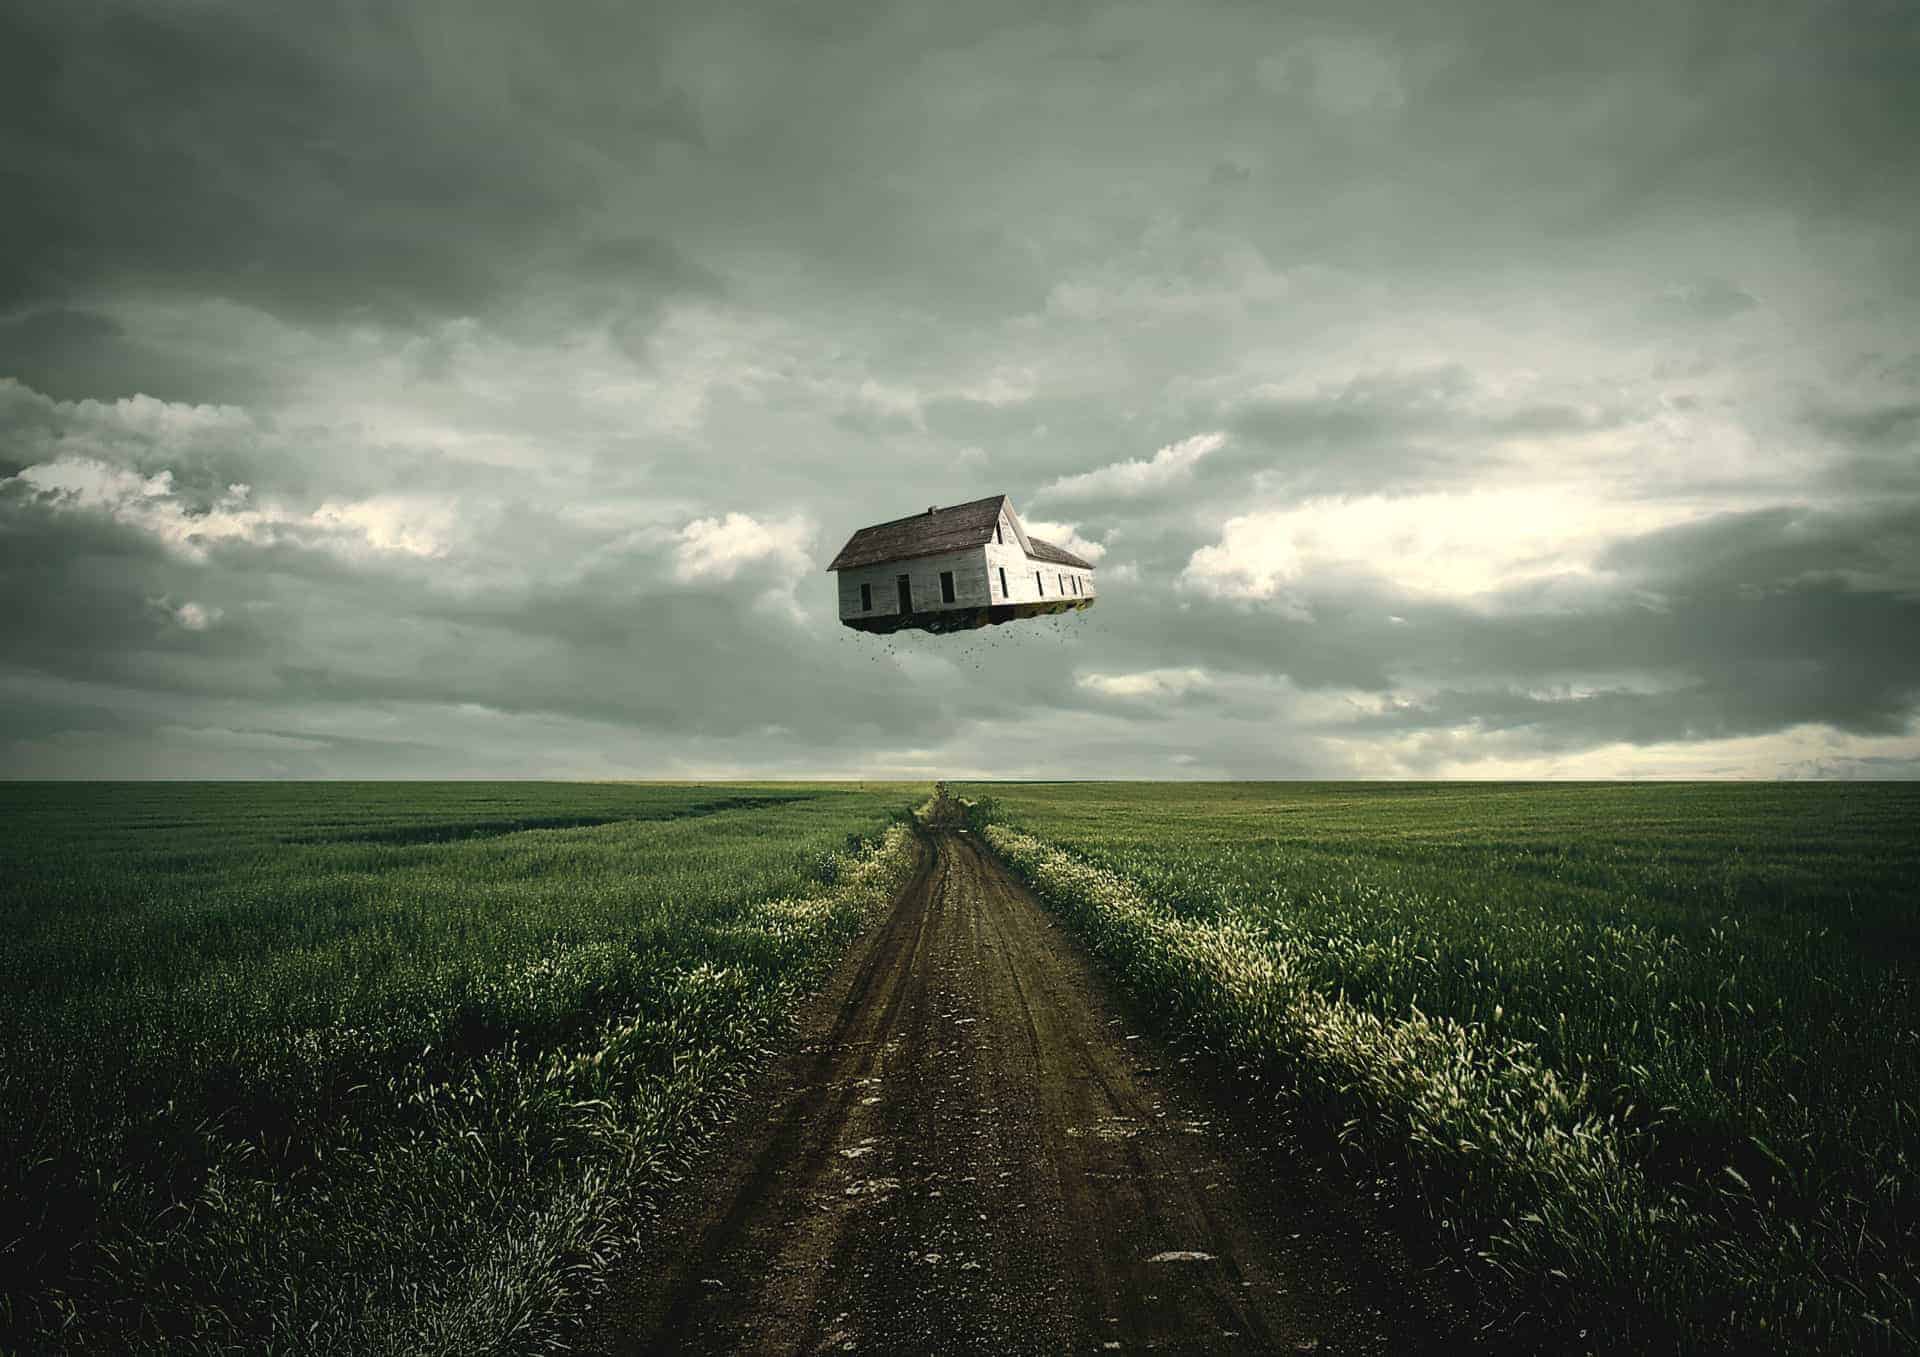 How to Create a Surreal Traveling House Photo Manipulation in Photoshop